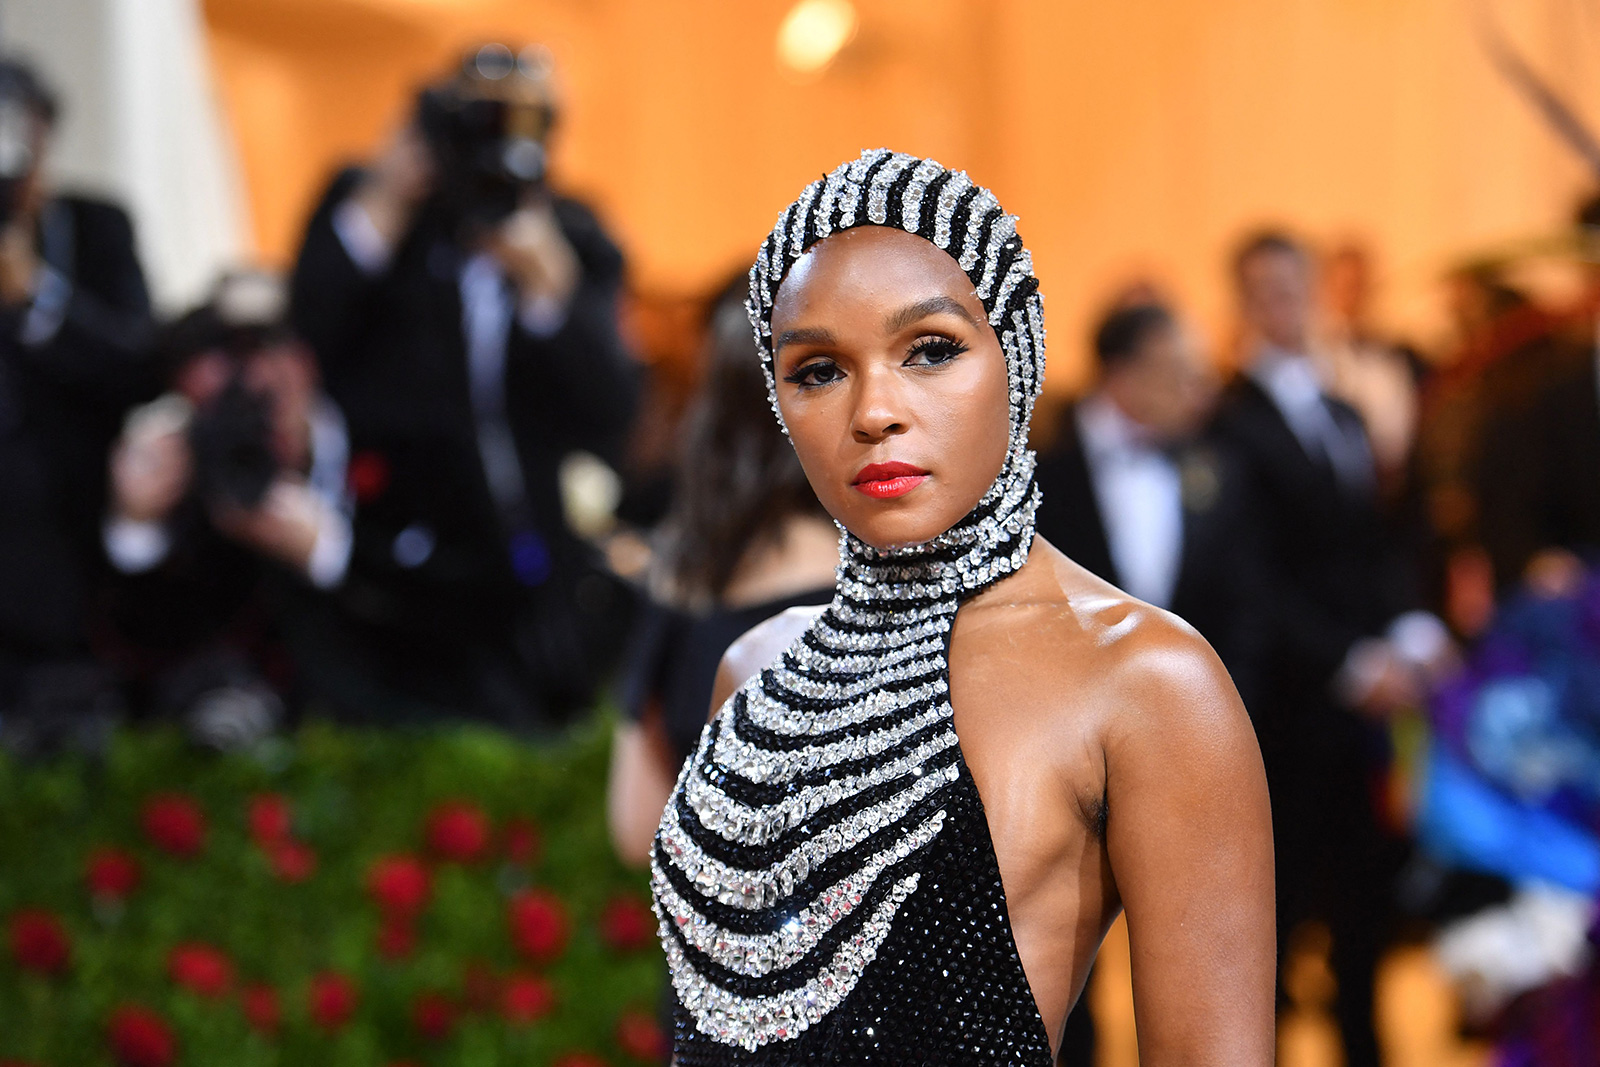 Janelle Monáe: 'Erasure is happening right under our noses' - CNN Style